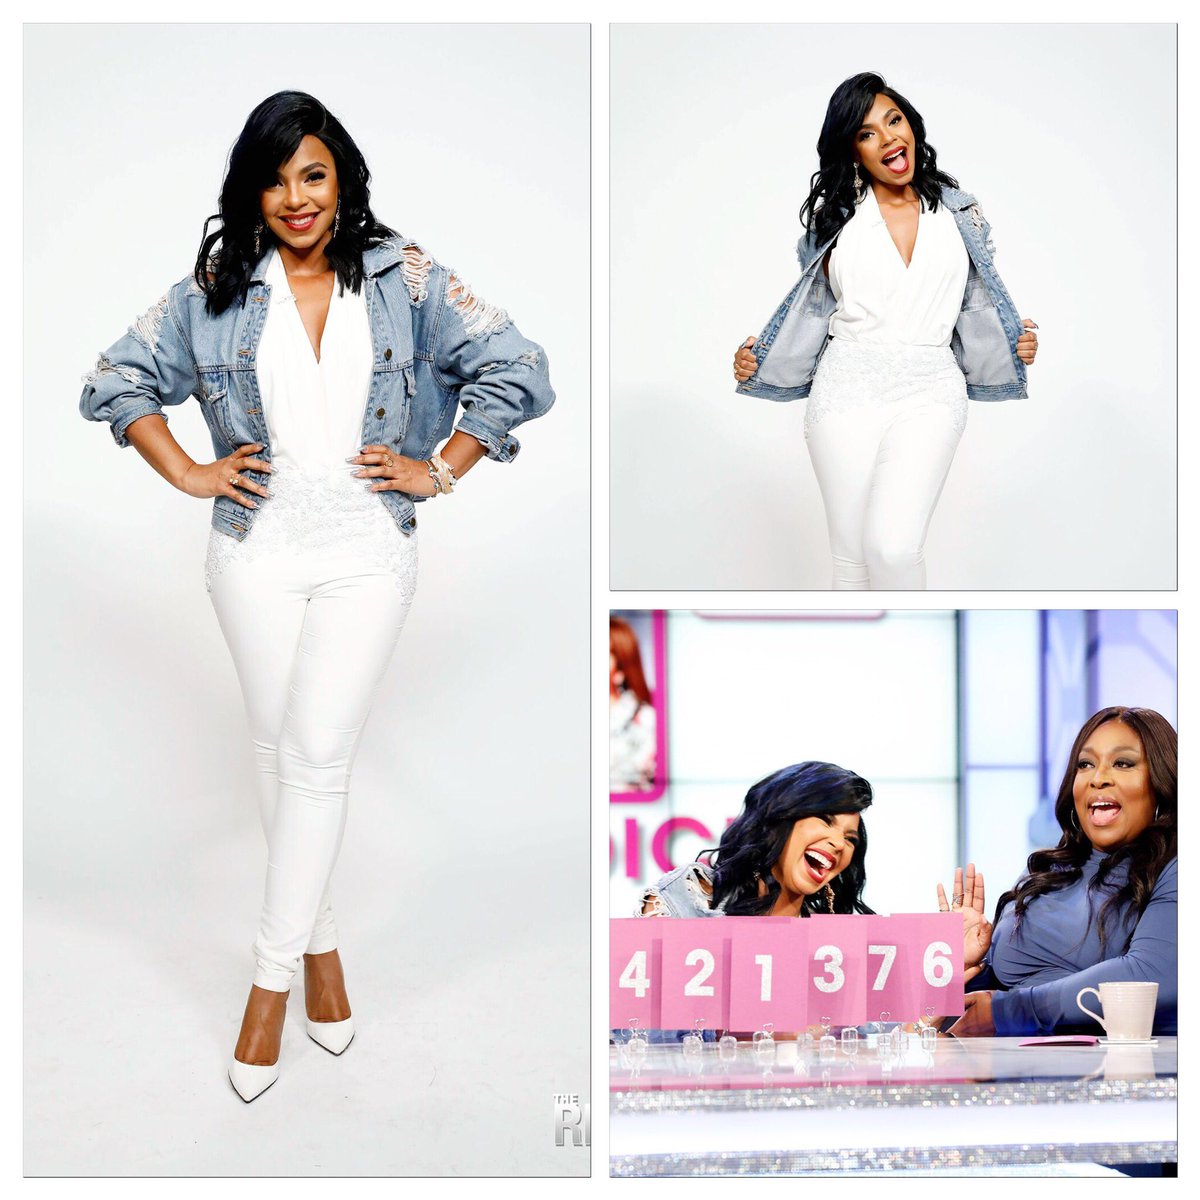 RT @LoniLove: All this week the amazing @ashanti cohost on #TheReal !!! https://t.co/mbDnoiO2qj > ❤️ make sure y'all tune in! ????